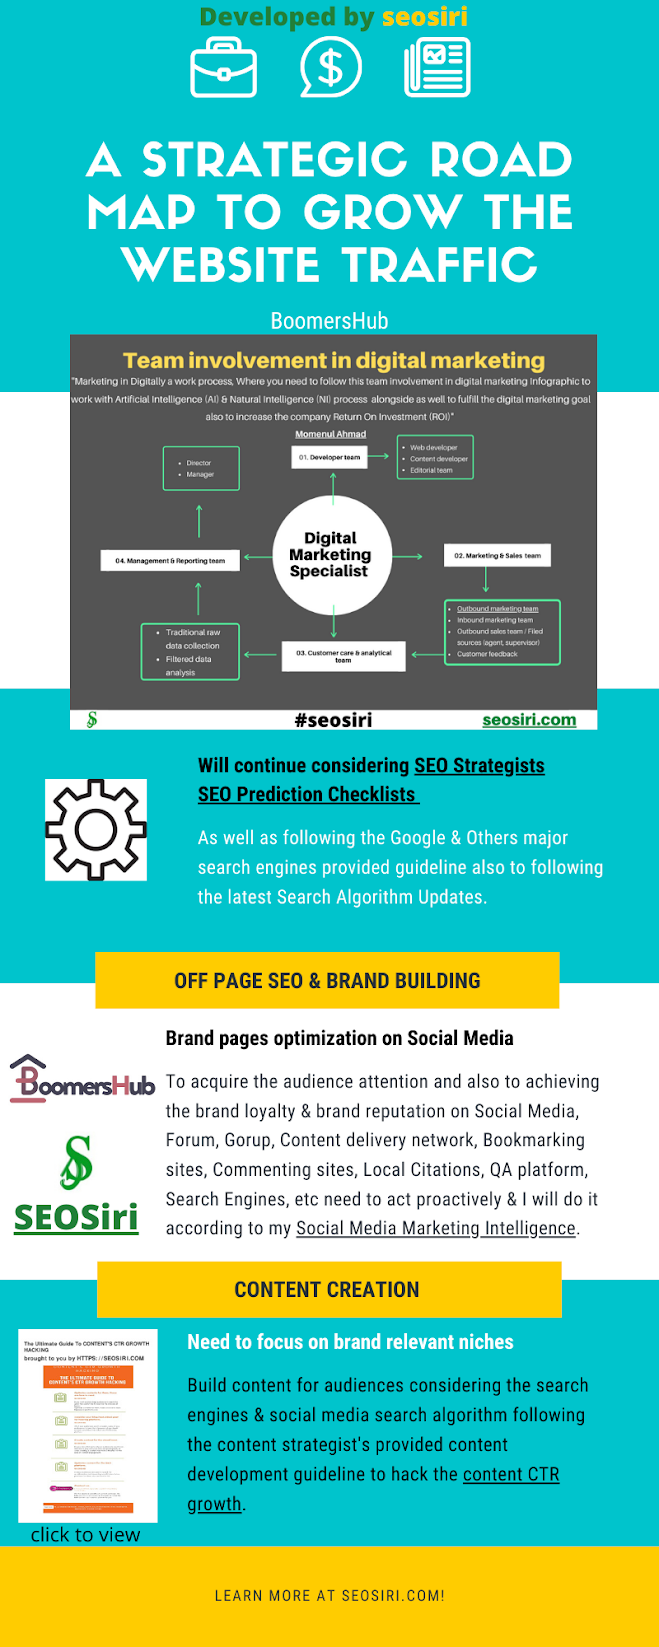 strategic road map to grow the website traffic and the role of Digital Marketing Specialist